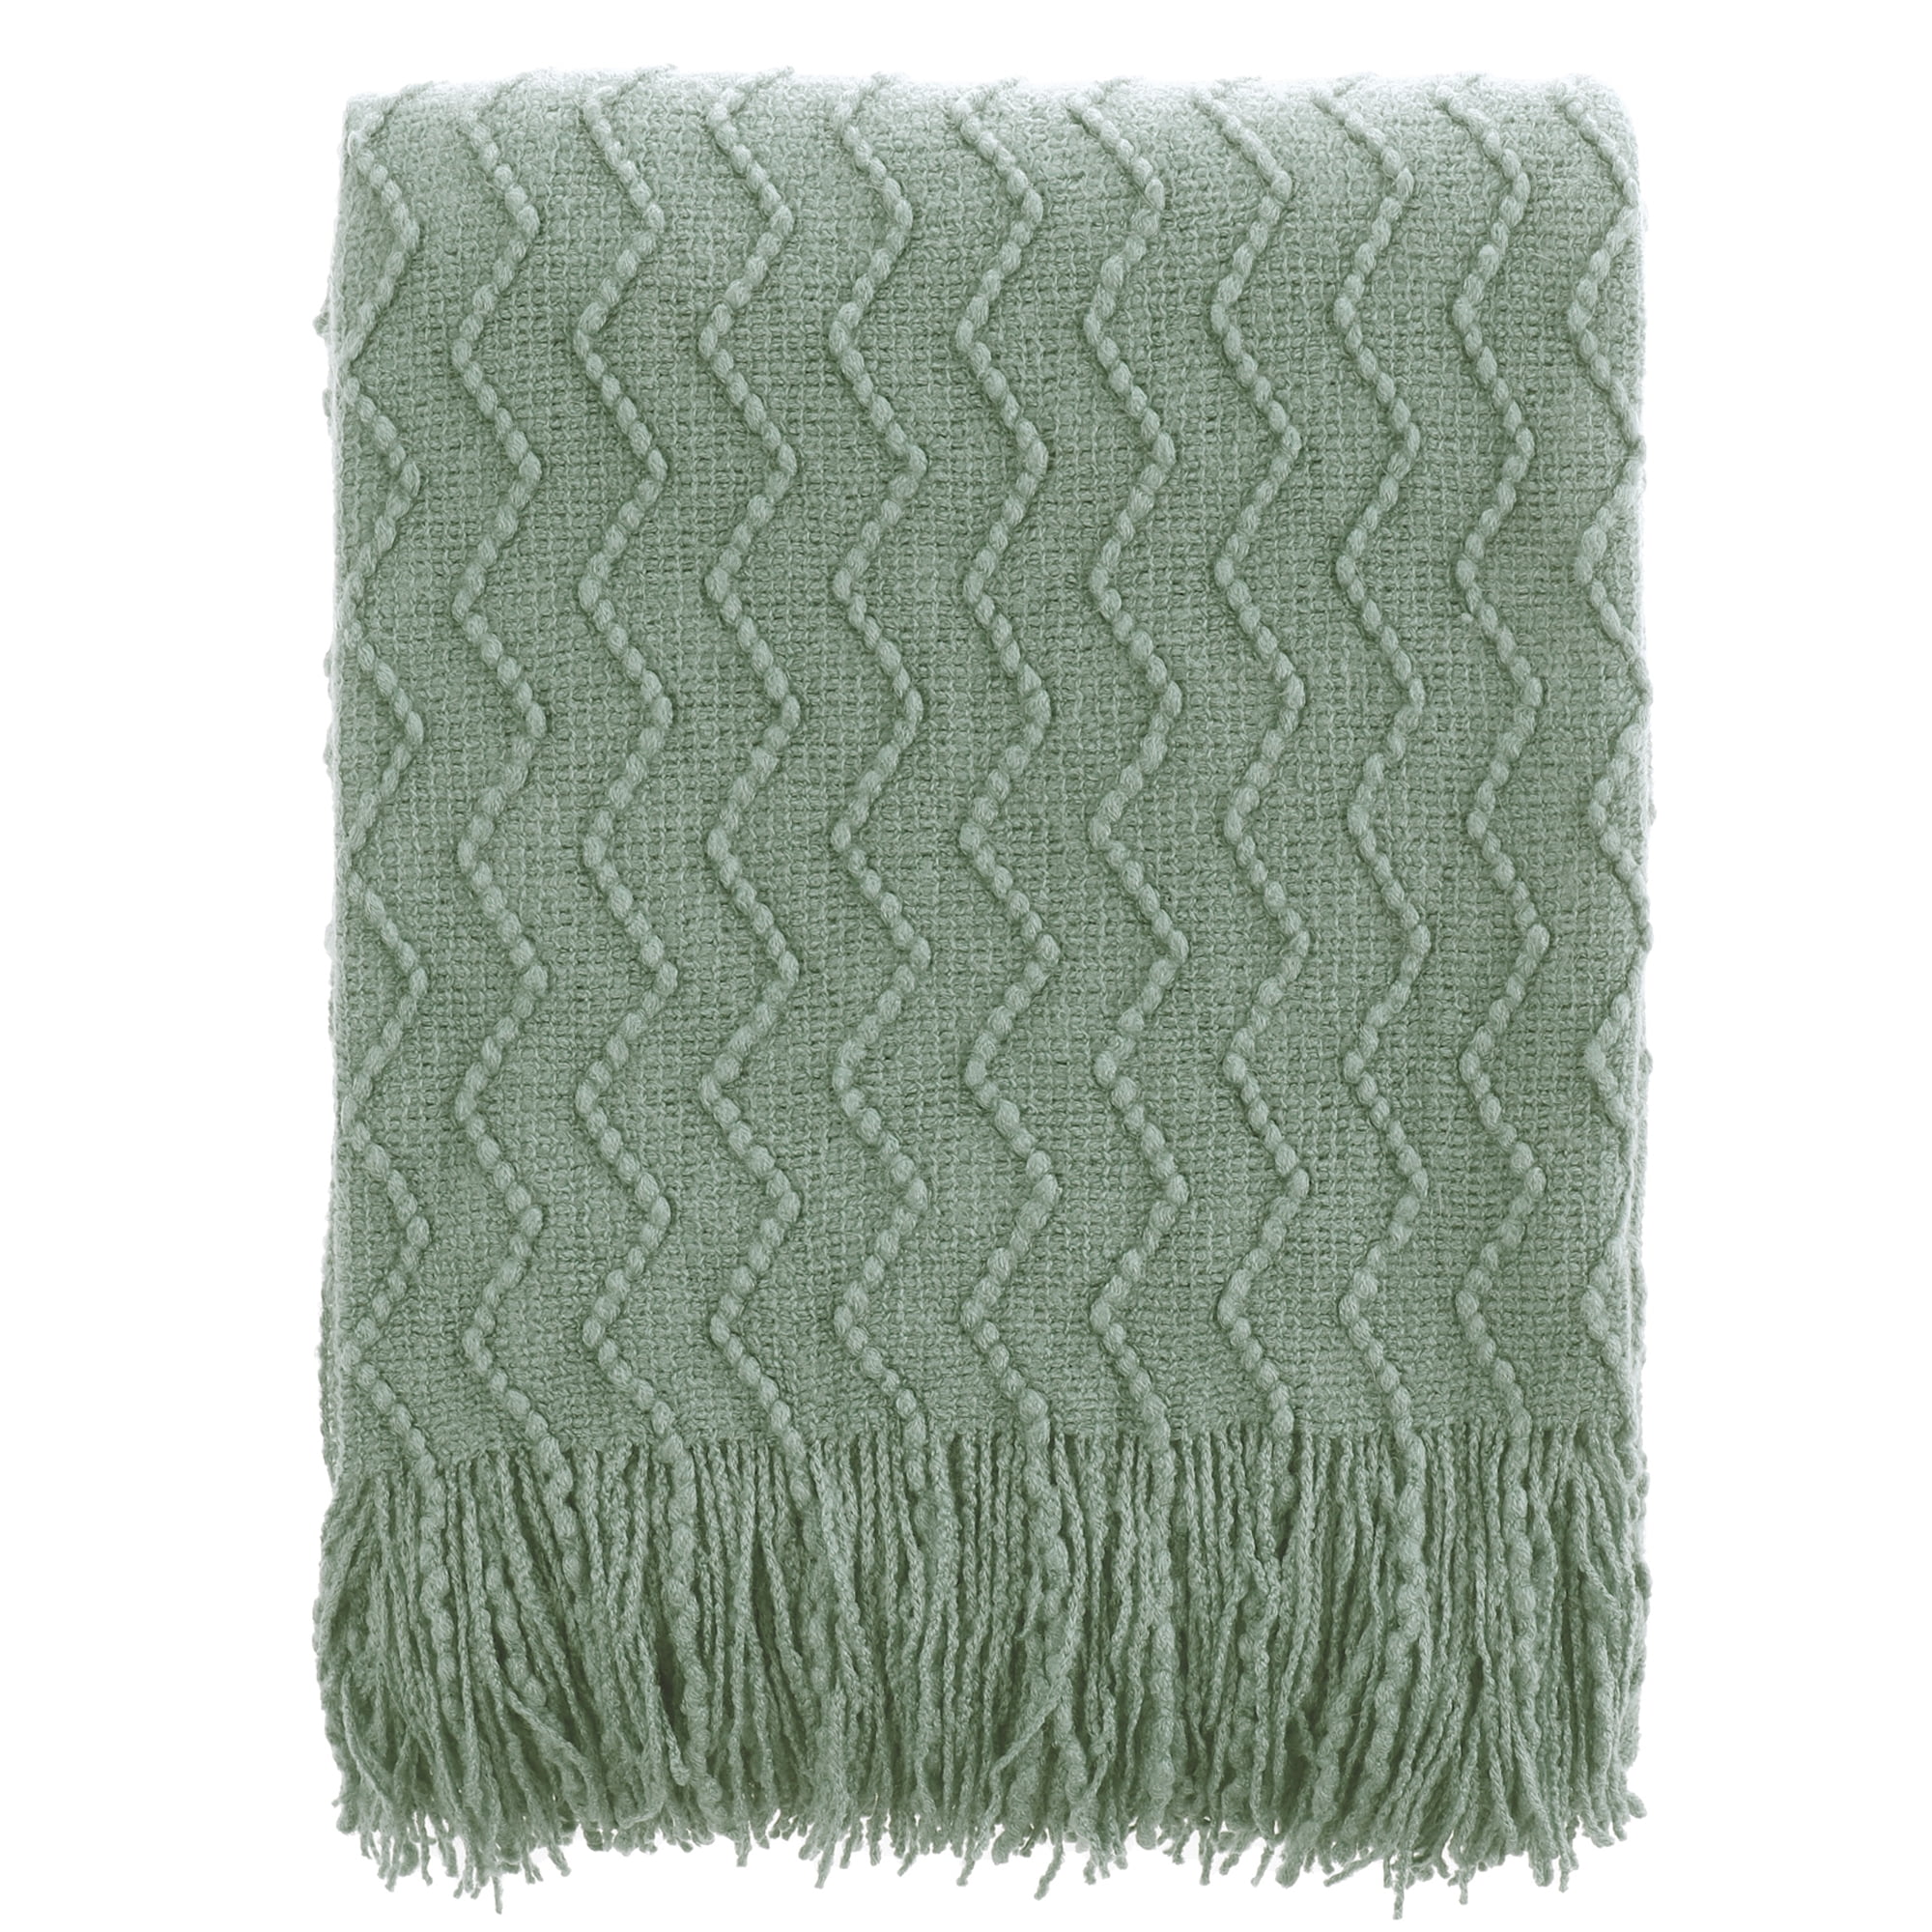 Battilo Sage Green Throw Blanket for Couch, Knit Sage Throw Blankets for Home Afghan Decorative Green Blanket Foot of Bed, 50"x60" Walmart.com